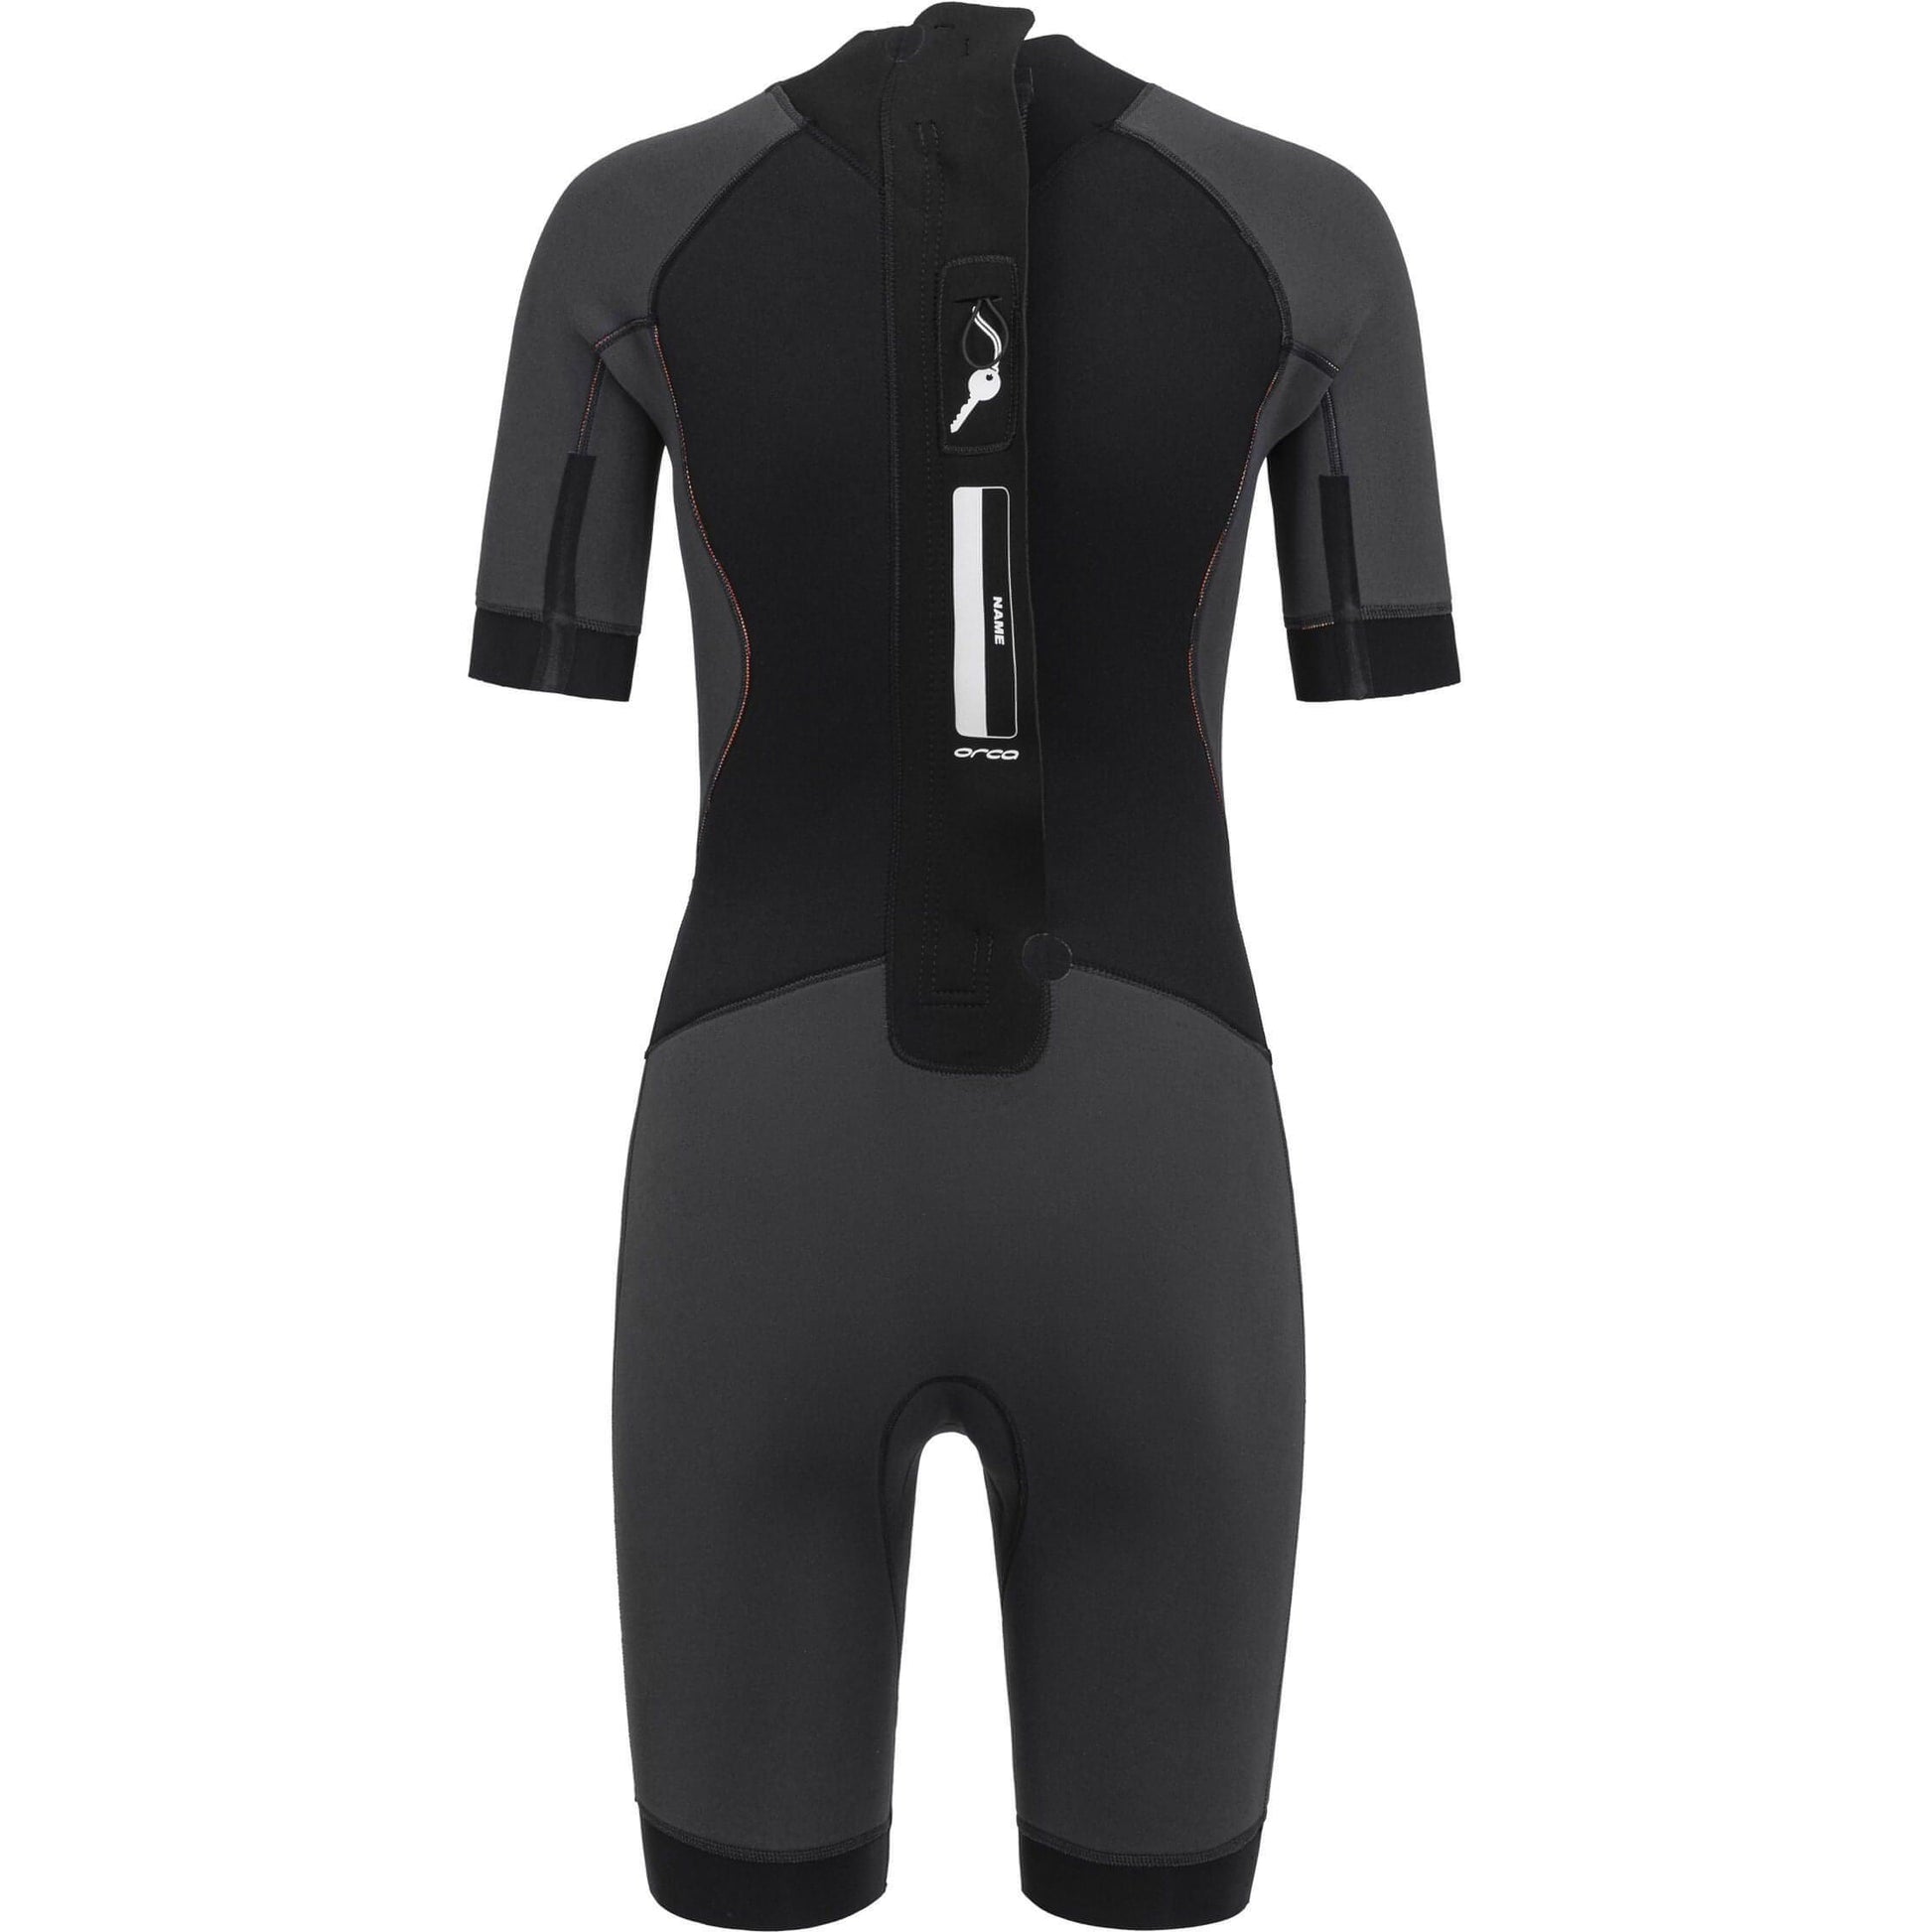 Orca Vitalis Shorty Openwater Wetsuit Nn6Y Inside Back View